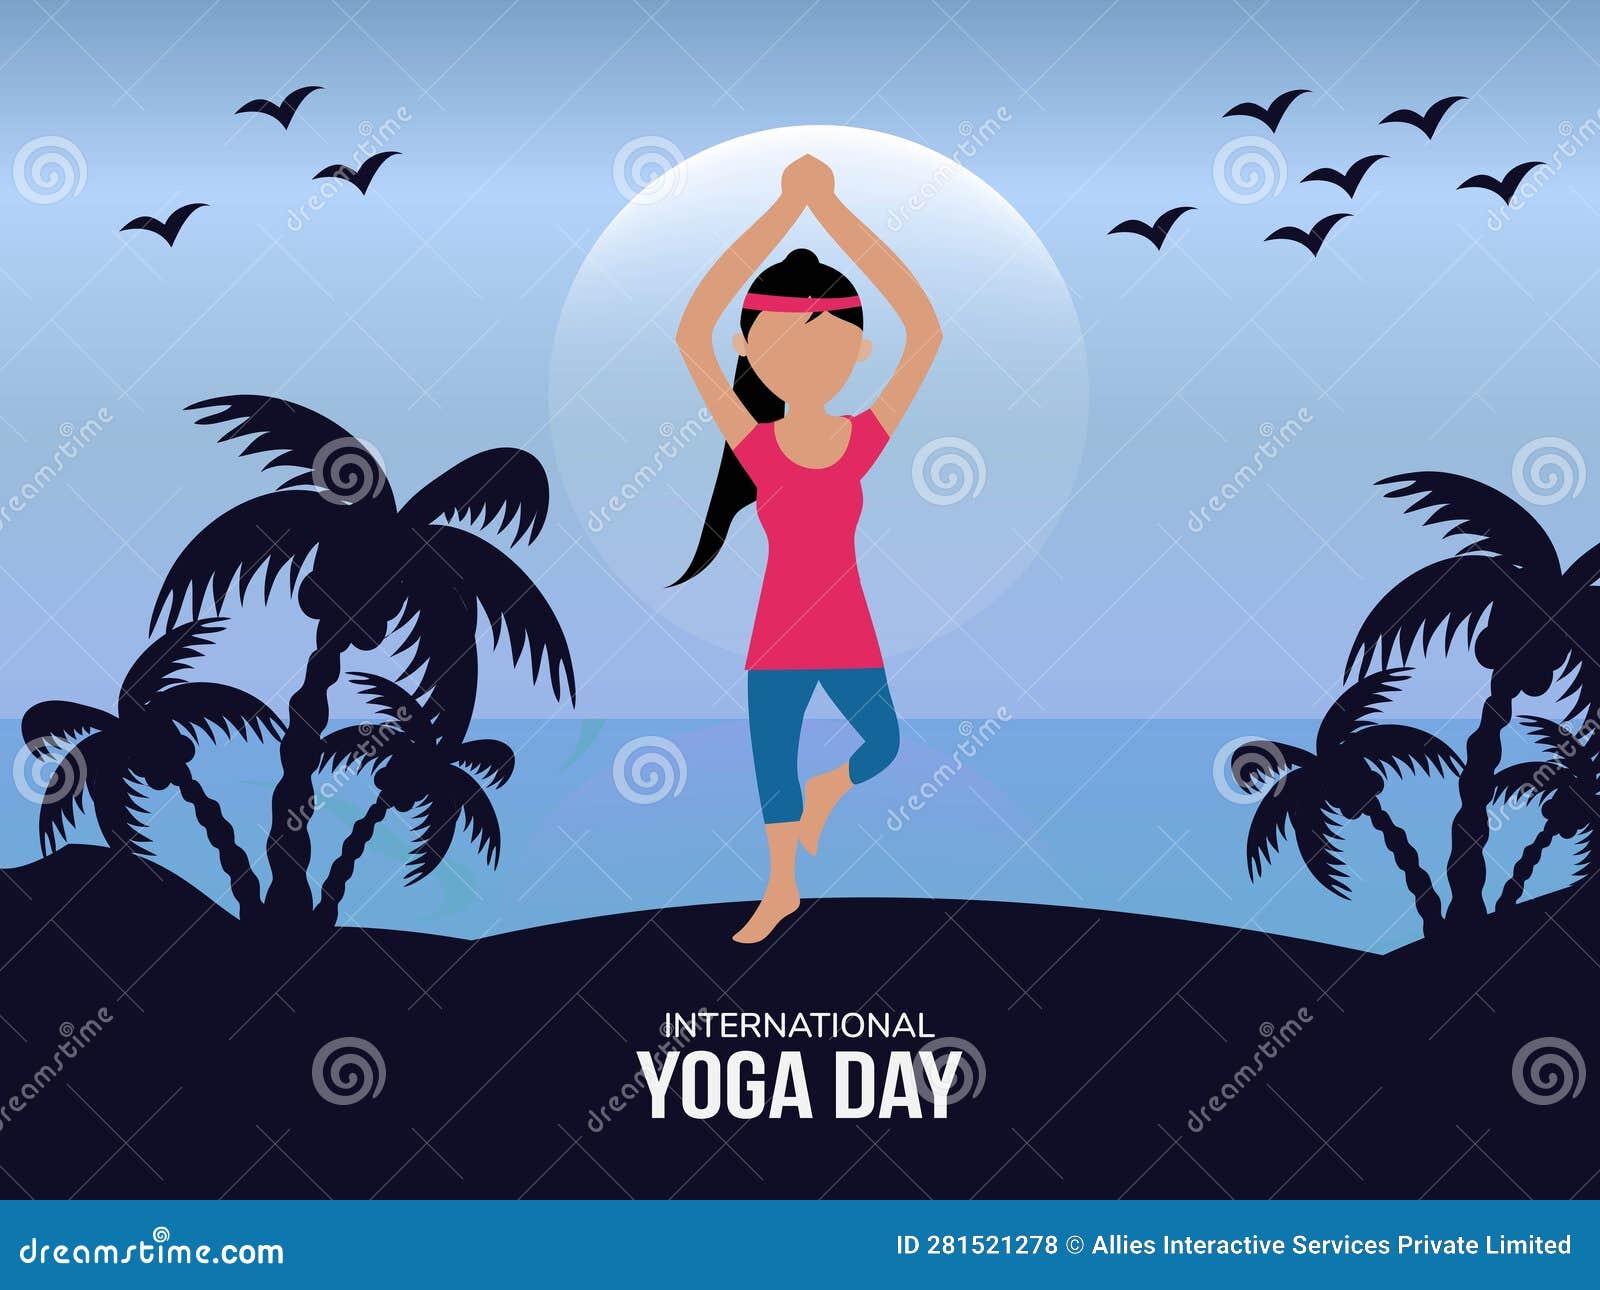 Yoga Poses Woman Isolated White Background Stock Photo 1442984927 |  Shutterstock